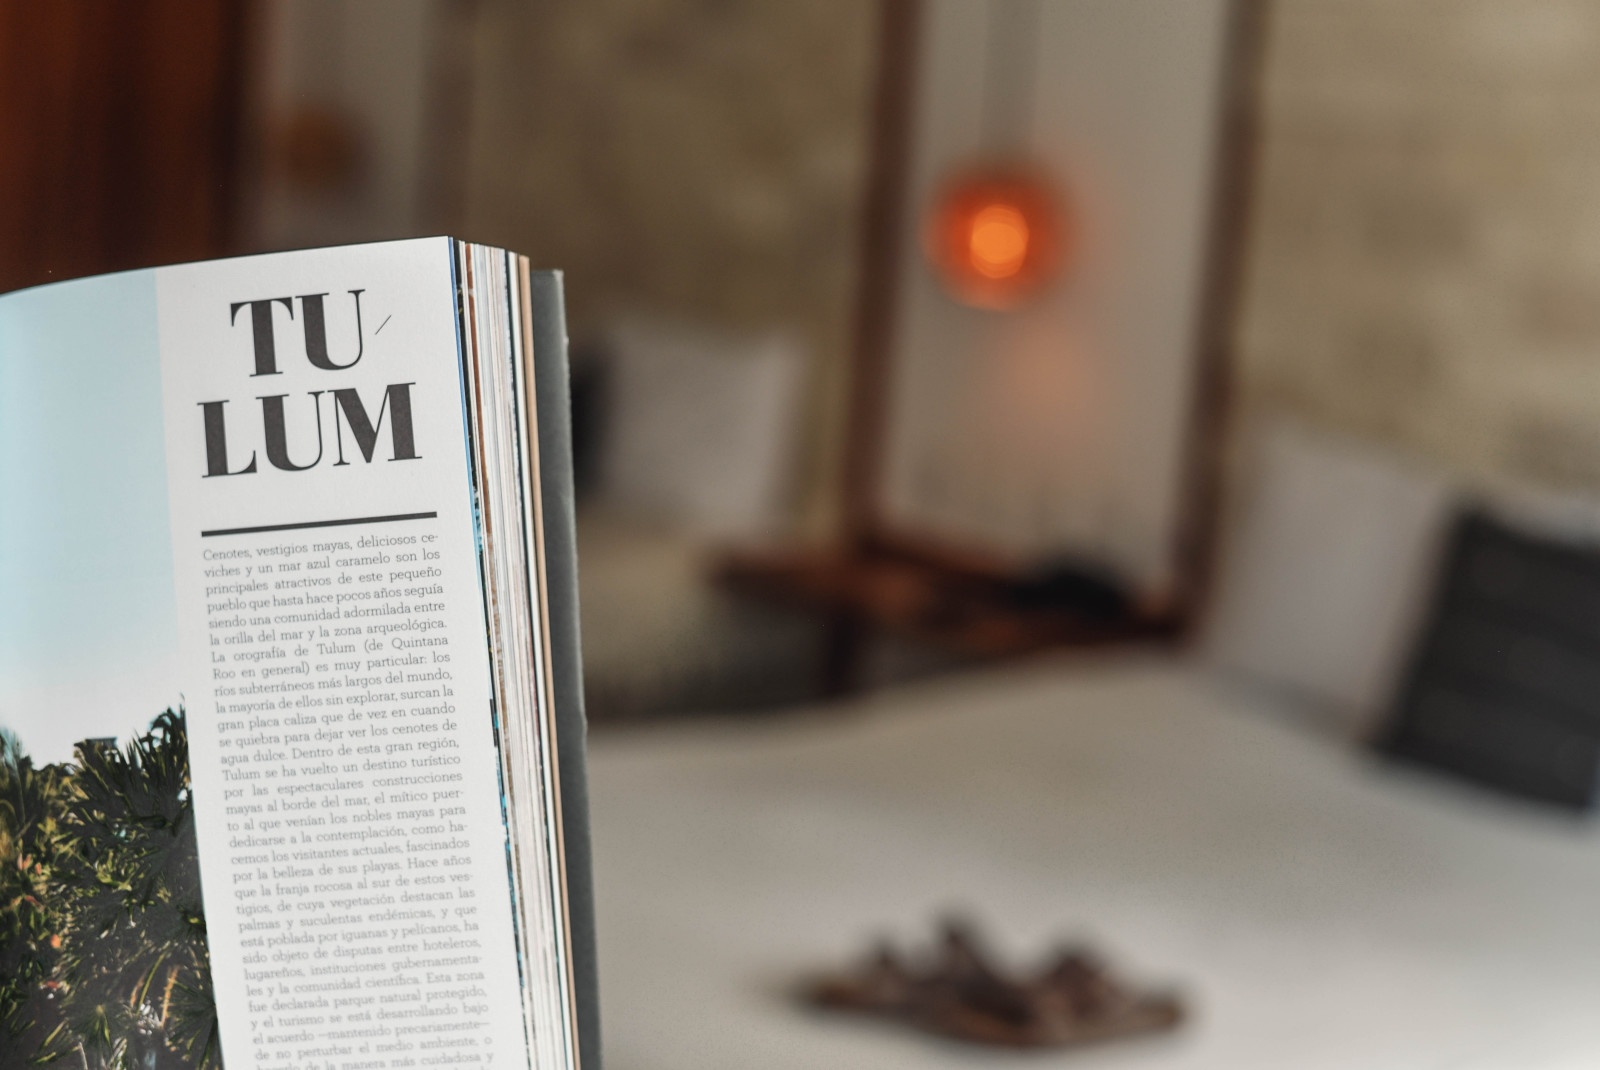 Tulum magazine with bed in background